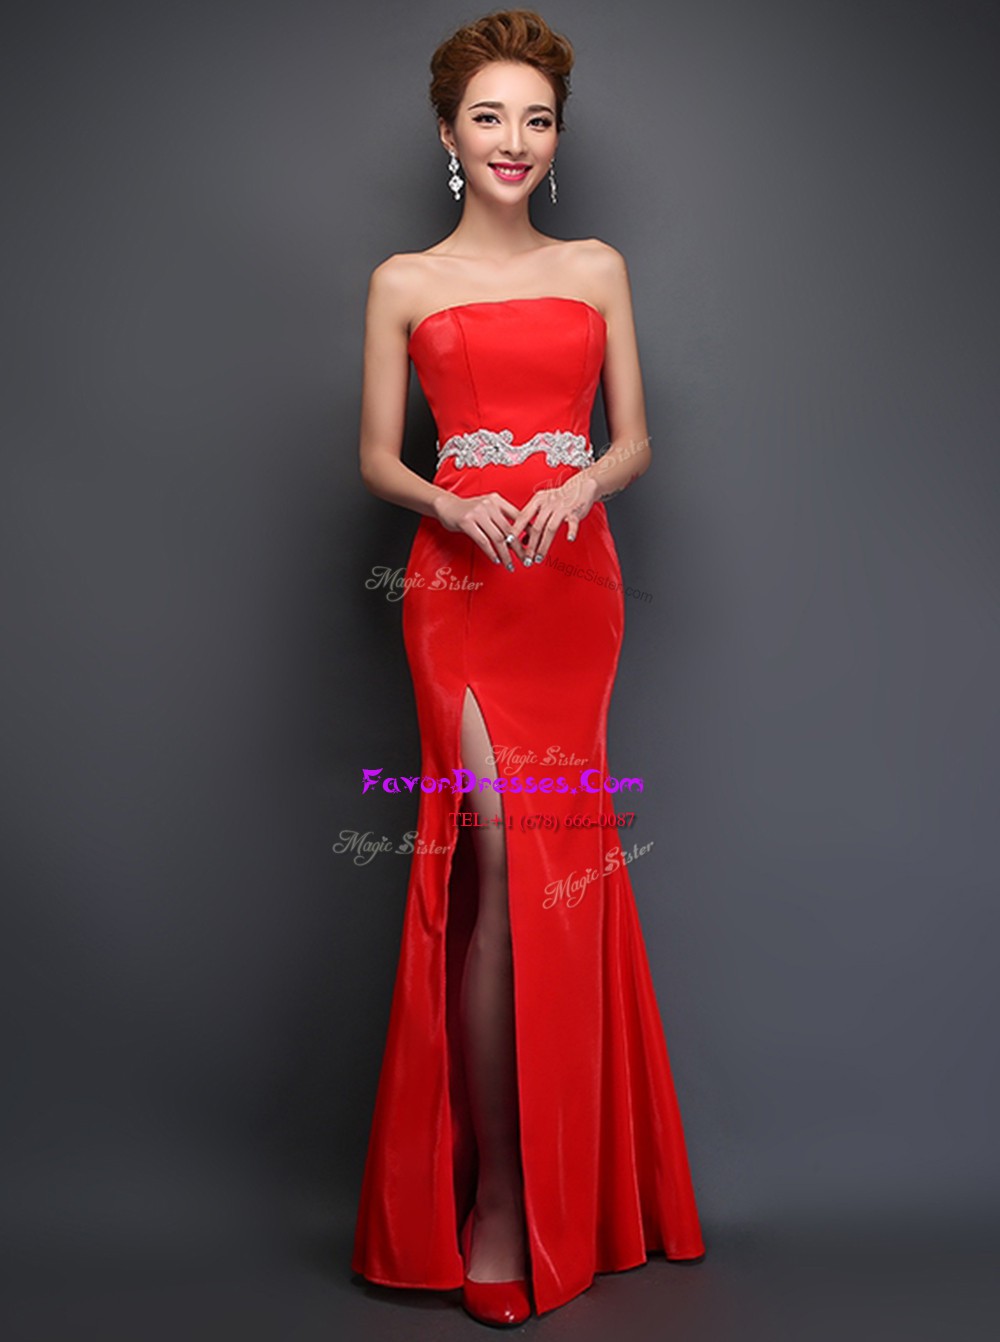 Free and Easy Mermaid Red Sleeveless Floor Length Beading Lace Up Prom Dresses